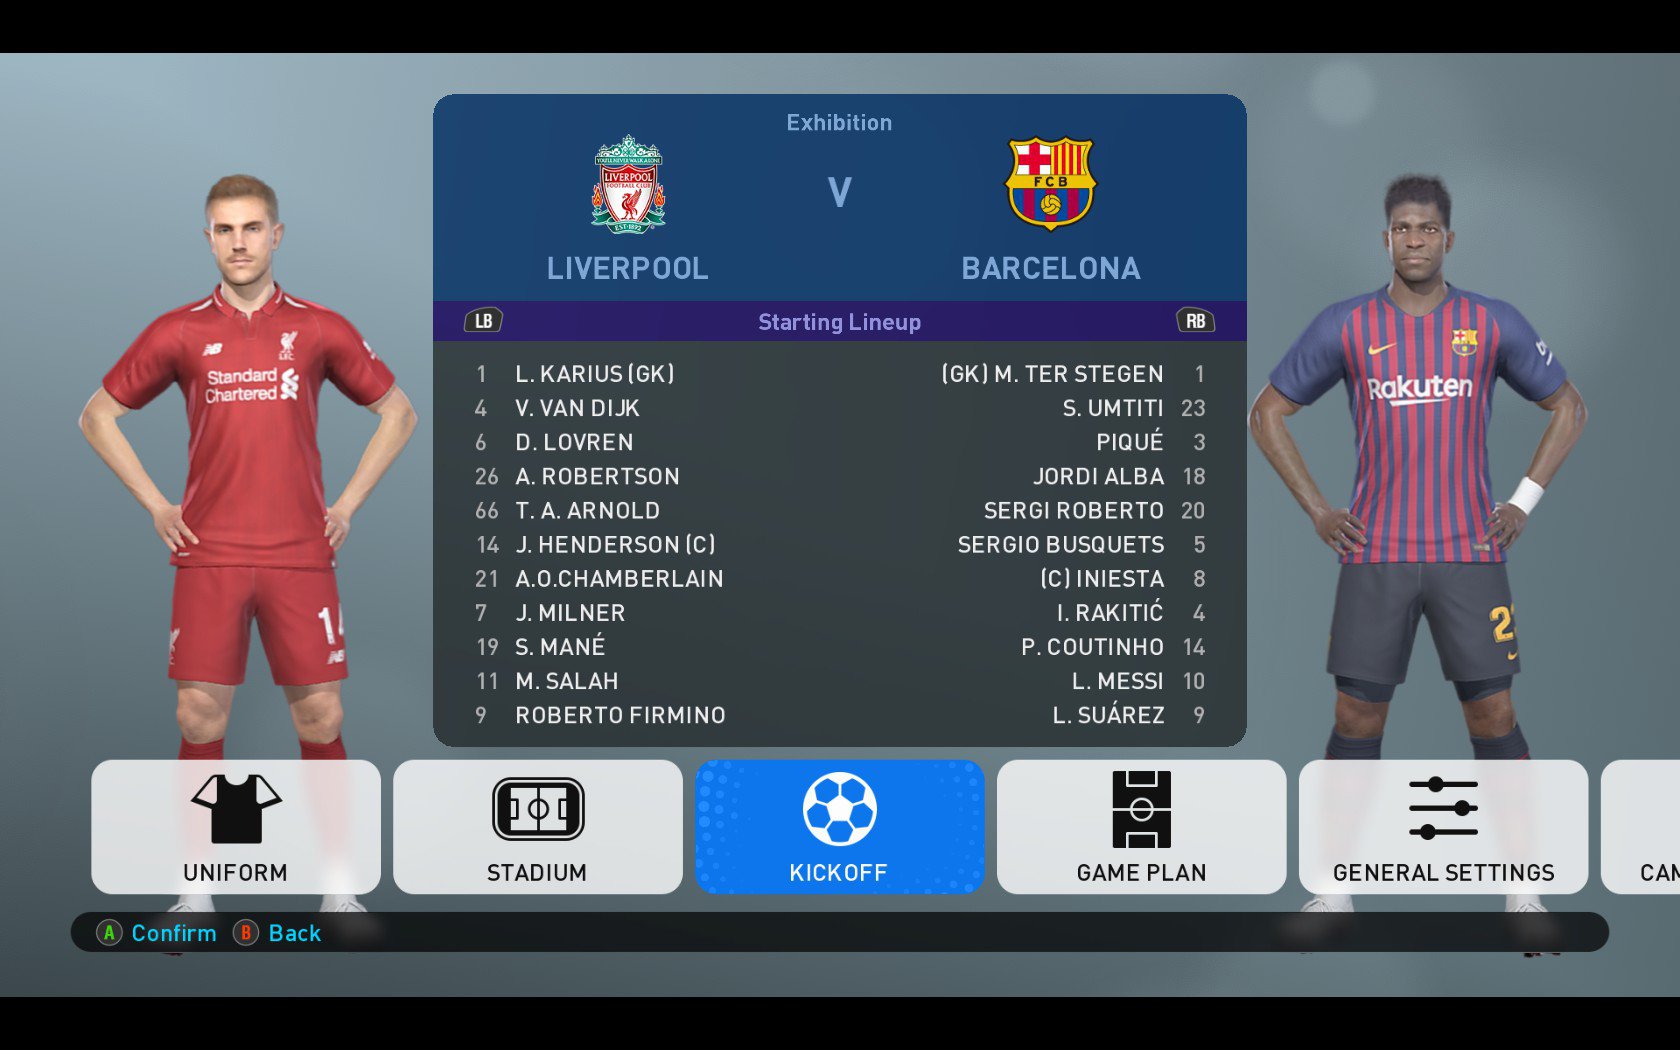 Download Pes 8 Full Version For Windows 7